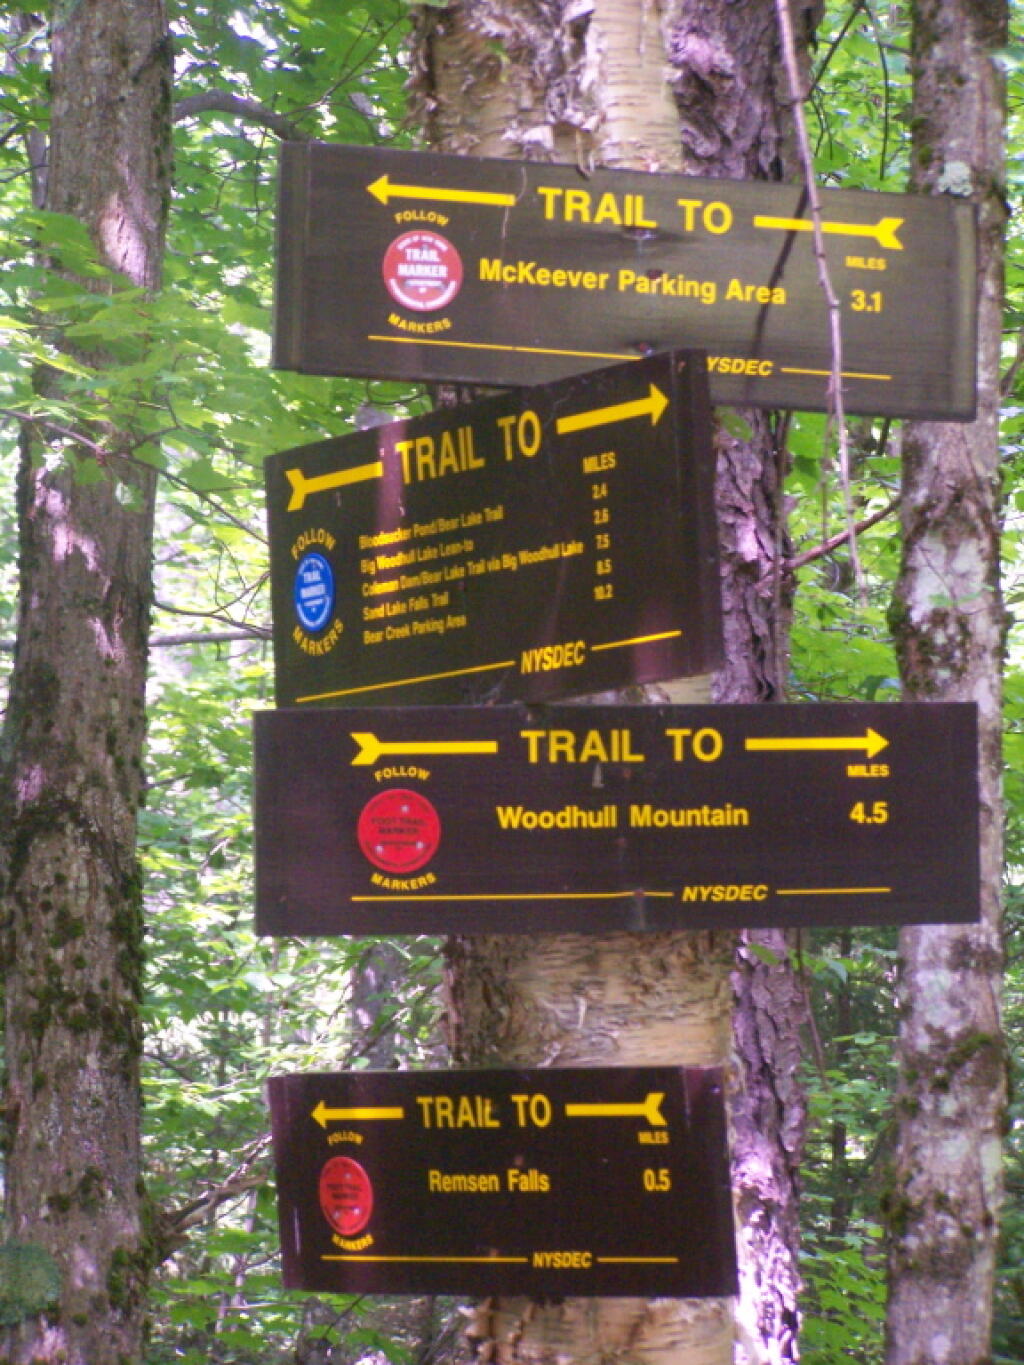 Intersection of Woodhull Mountain Trail and Remsen Falls Trail